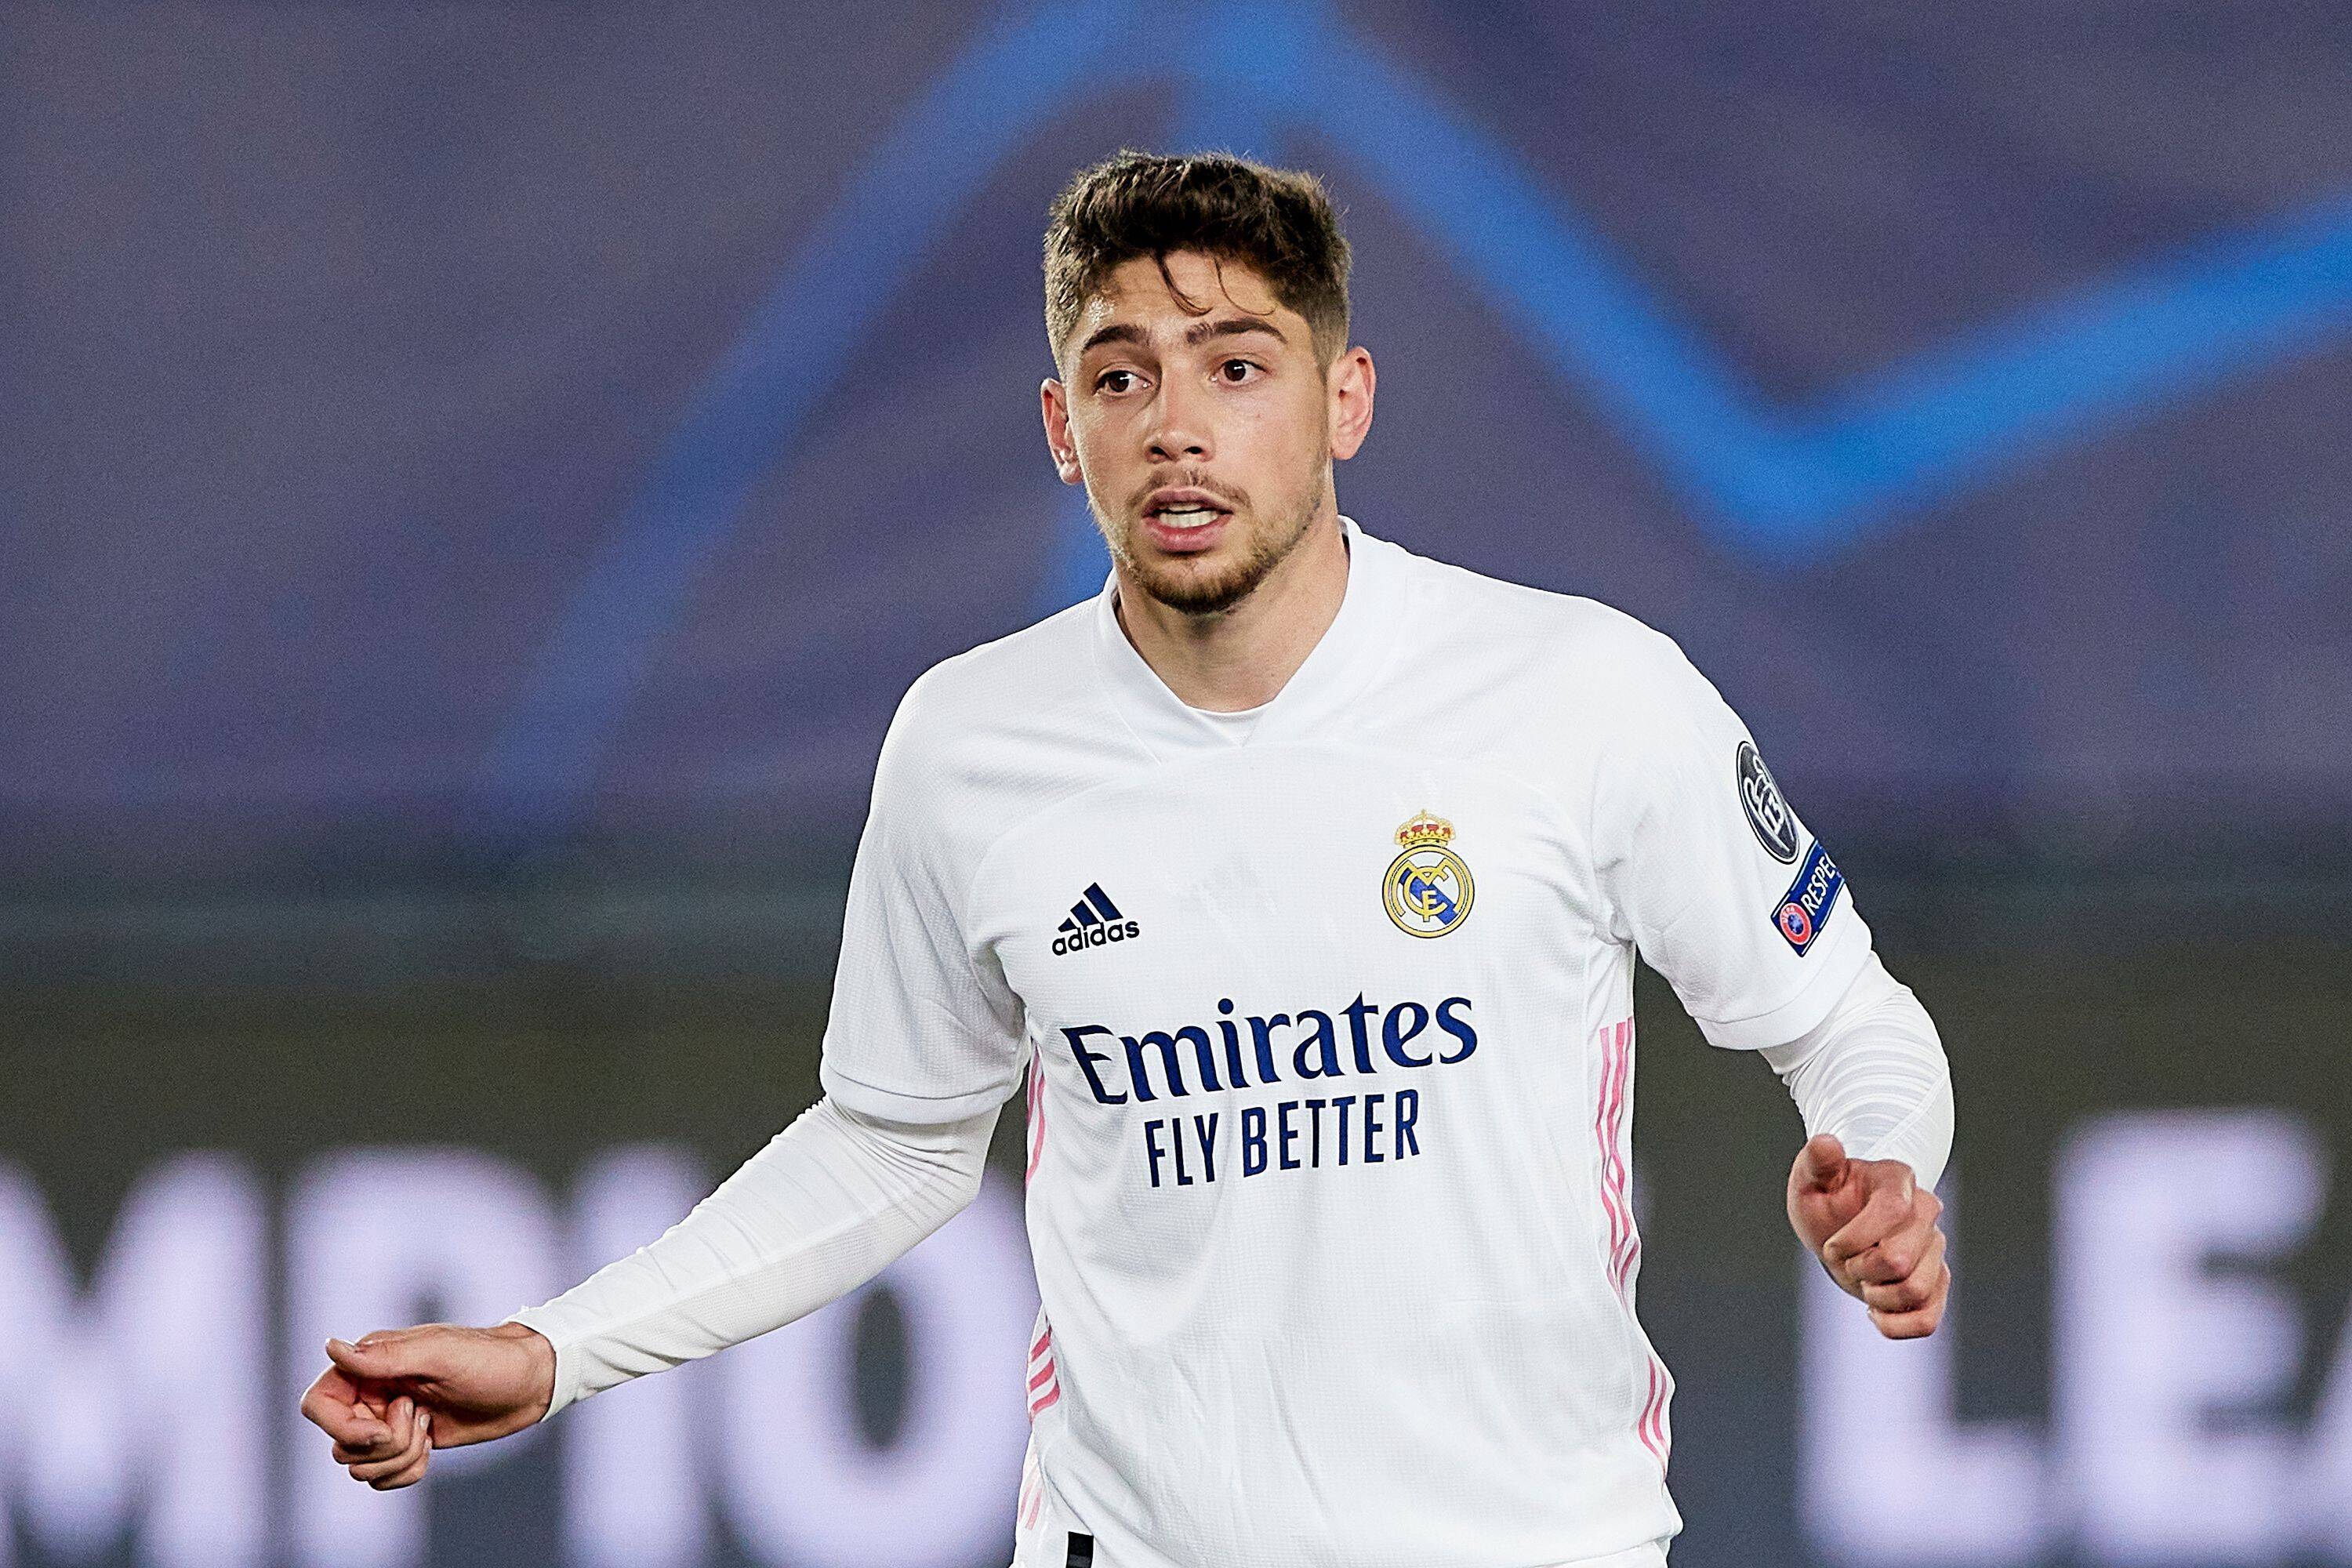 Incredible statistic shows Real Madrid star has become Carlo